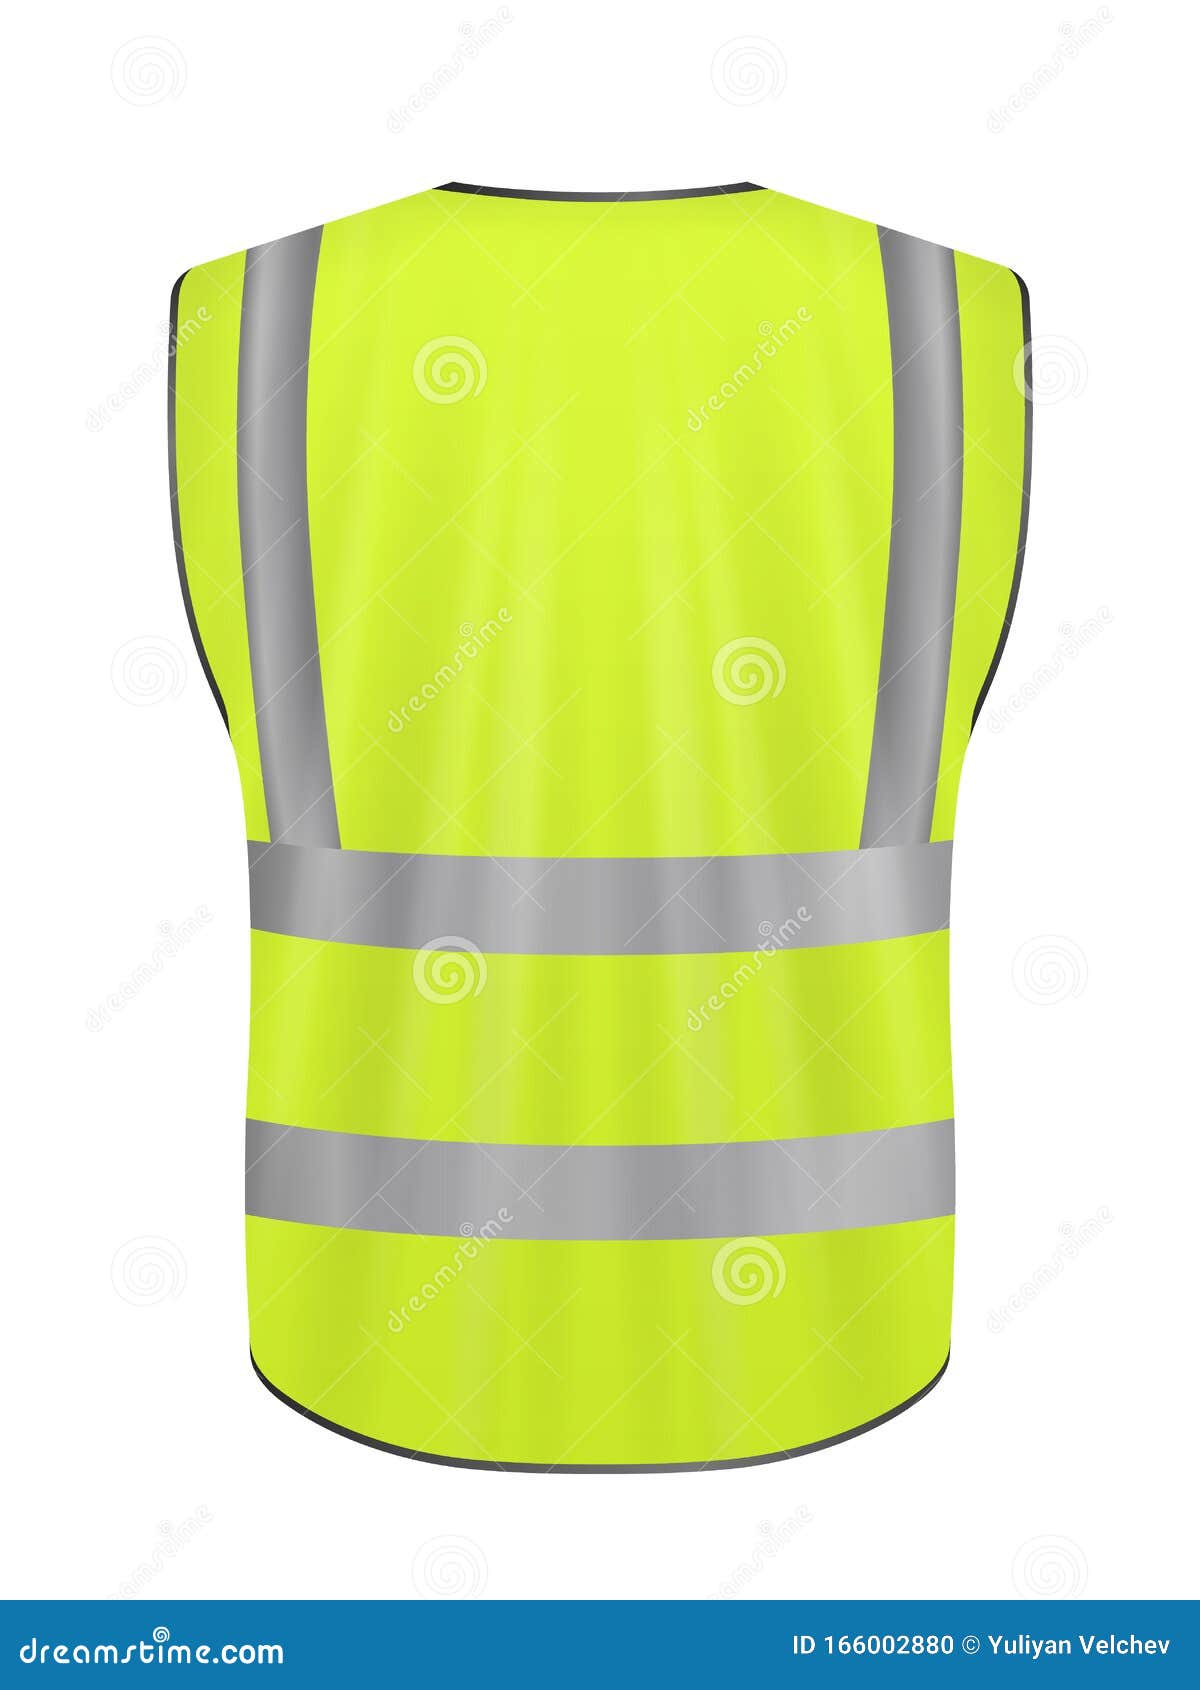 Download Download Safety Vest Mockup Free Images Yellowimages ...